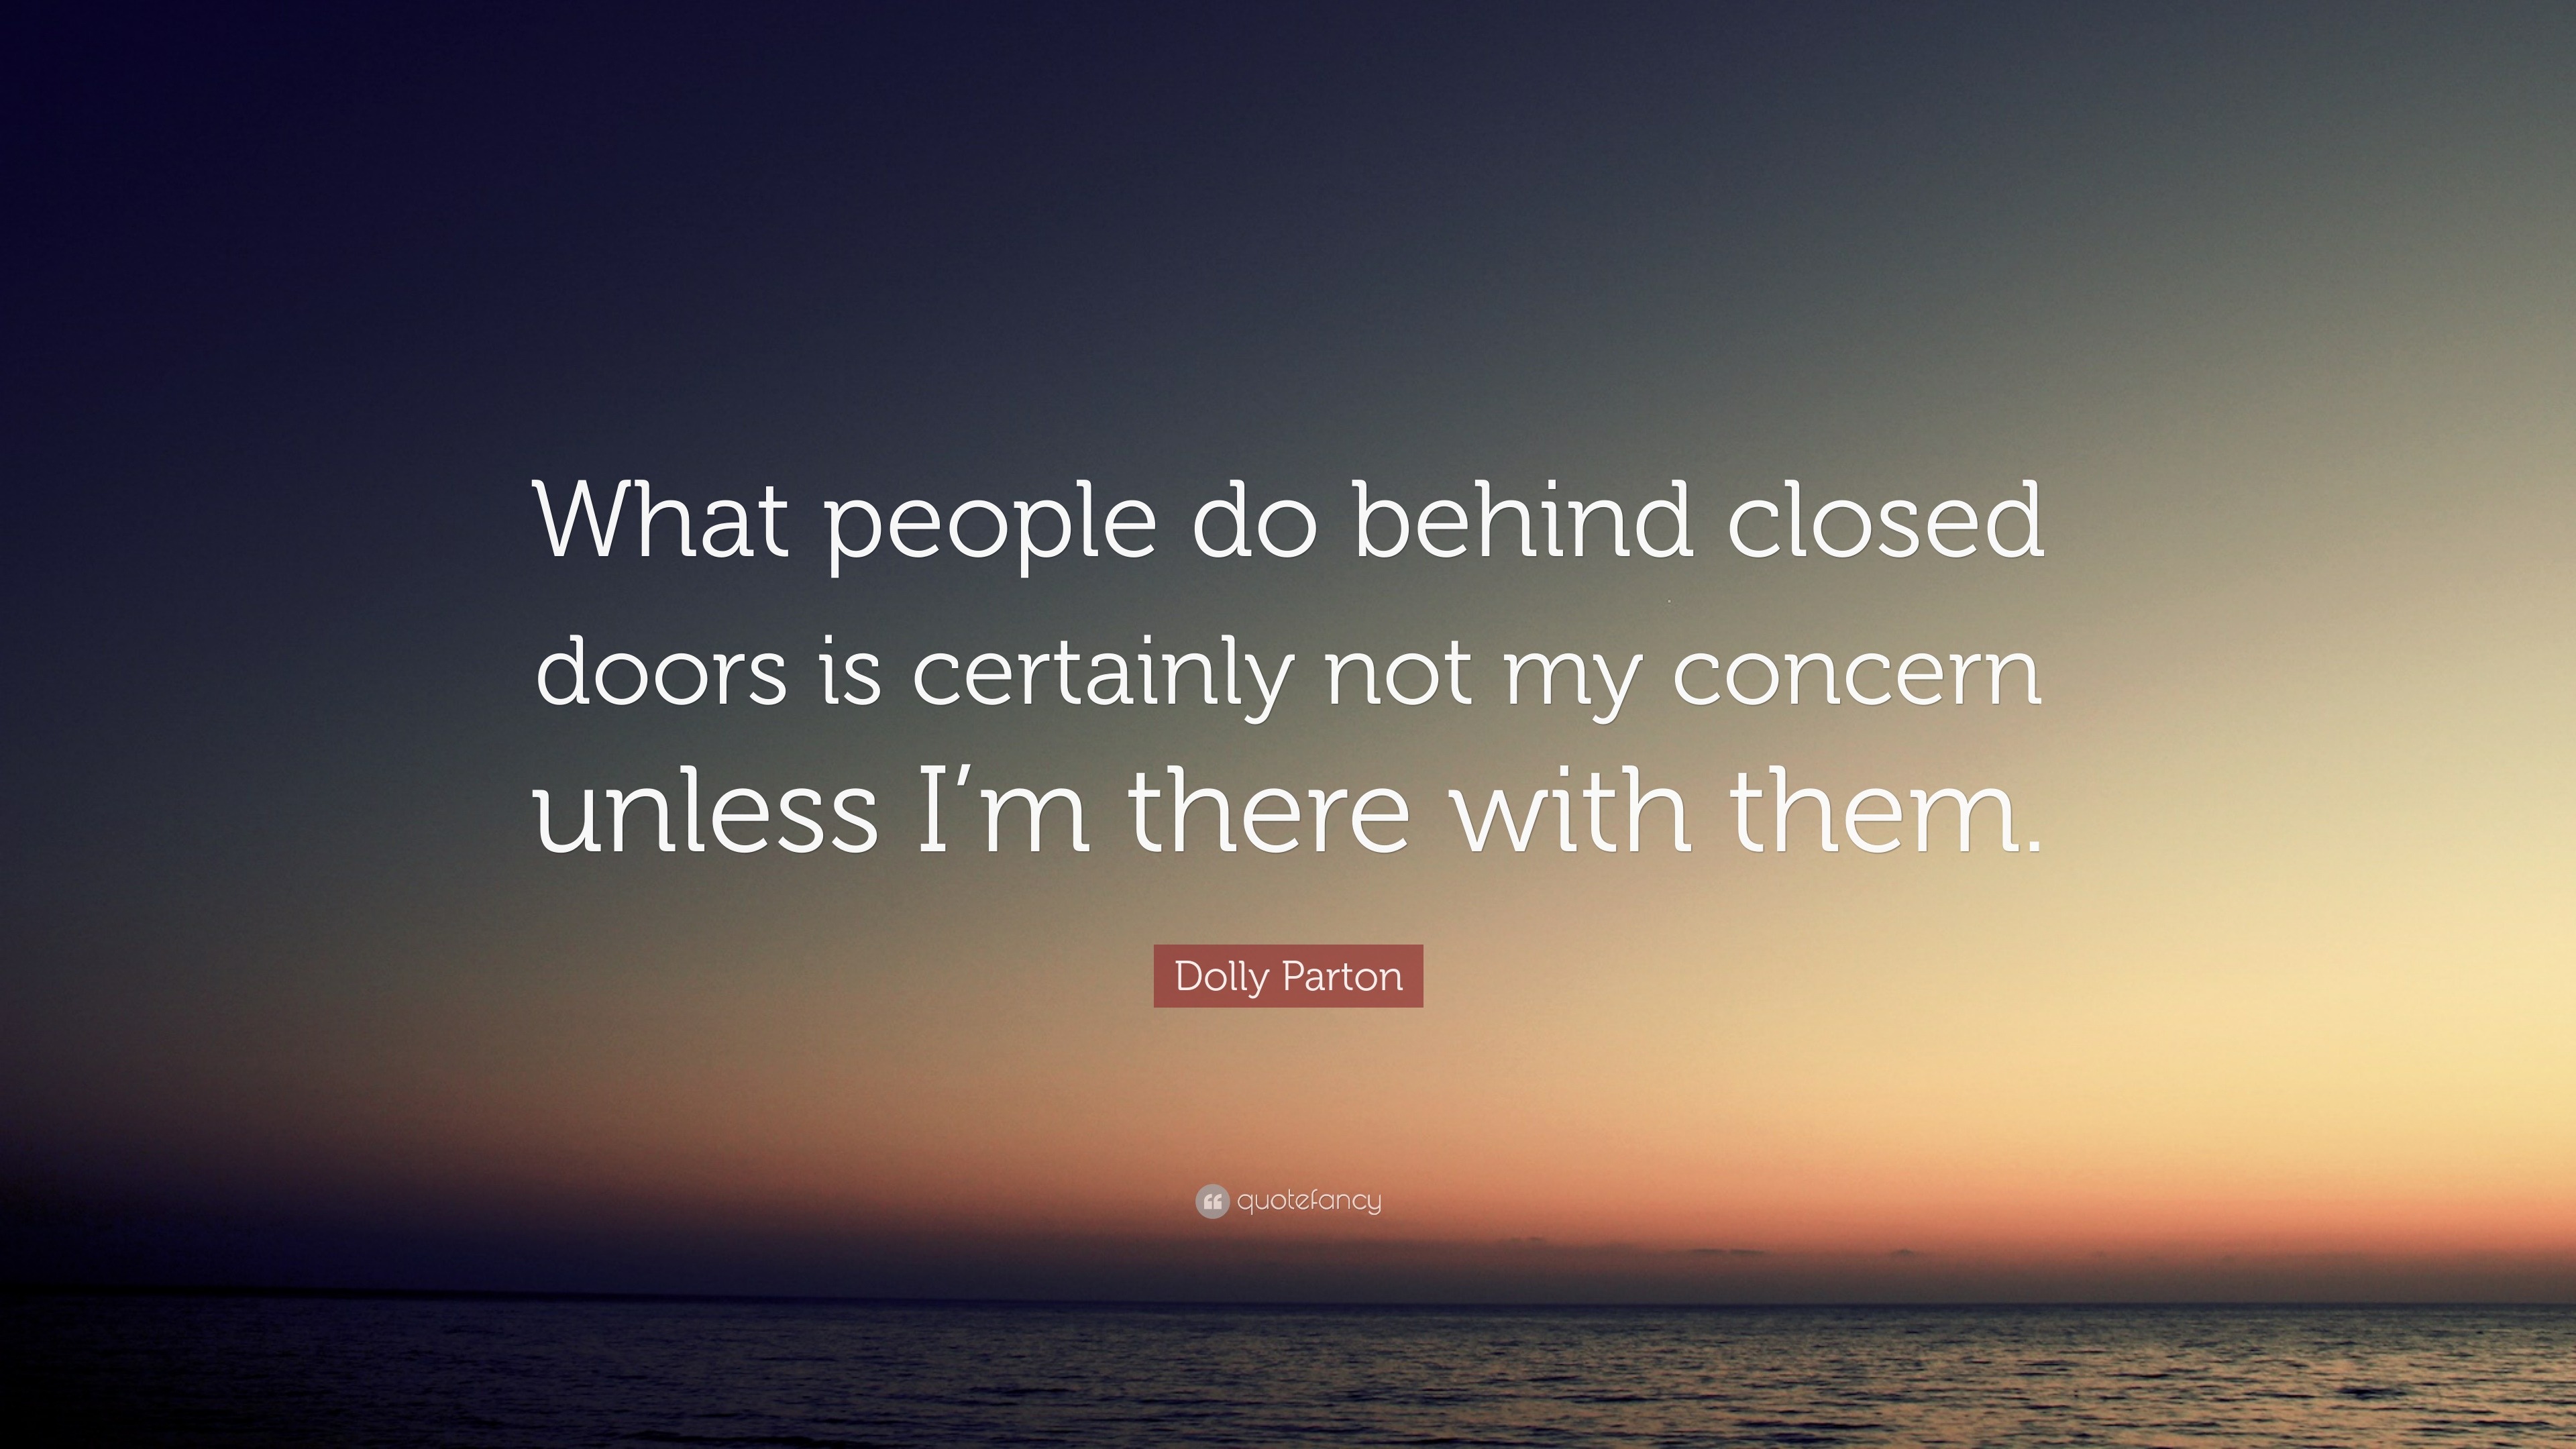 Dolly Parton Quote: “What people do behind closed doors is certainly ...